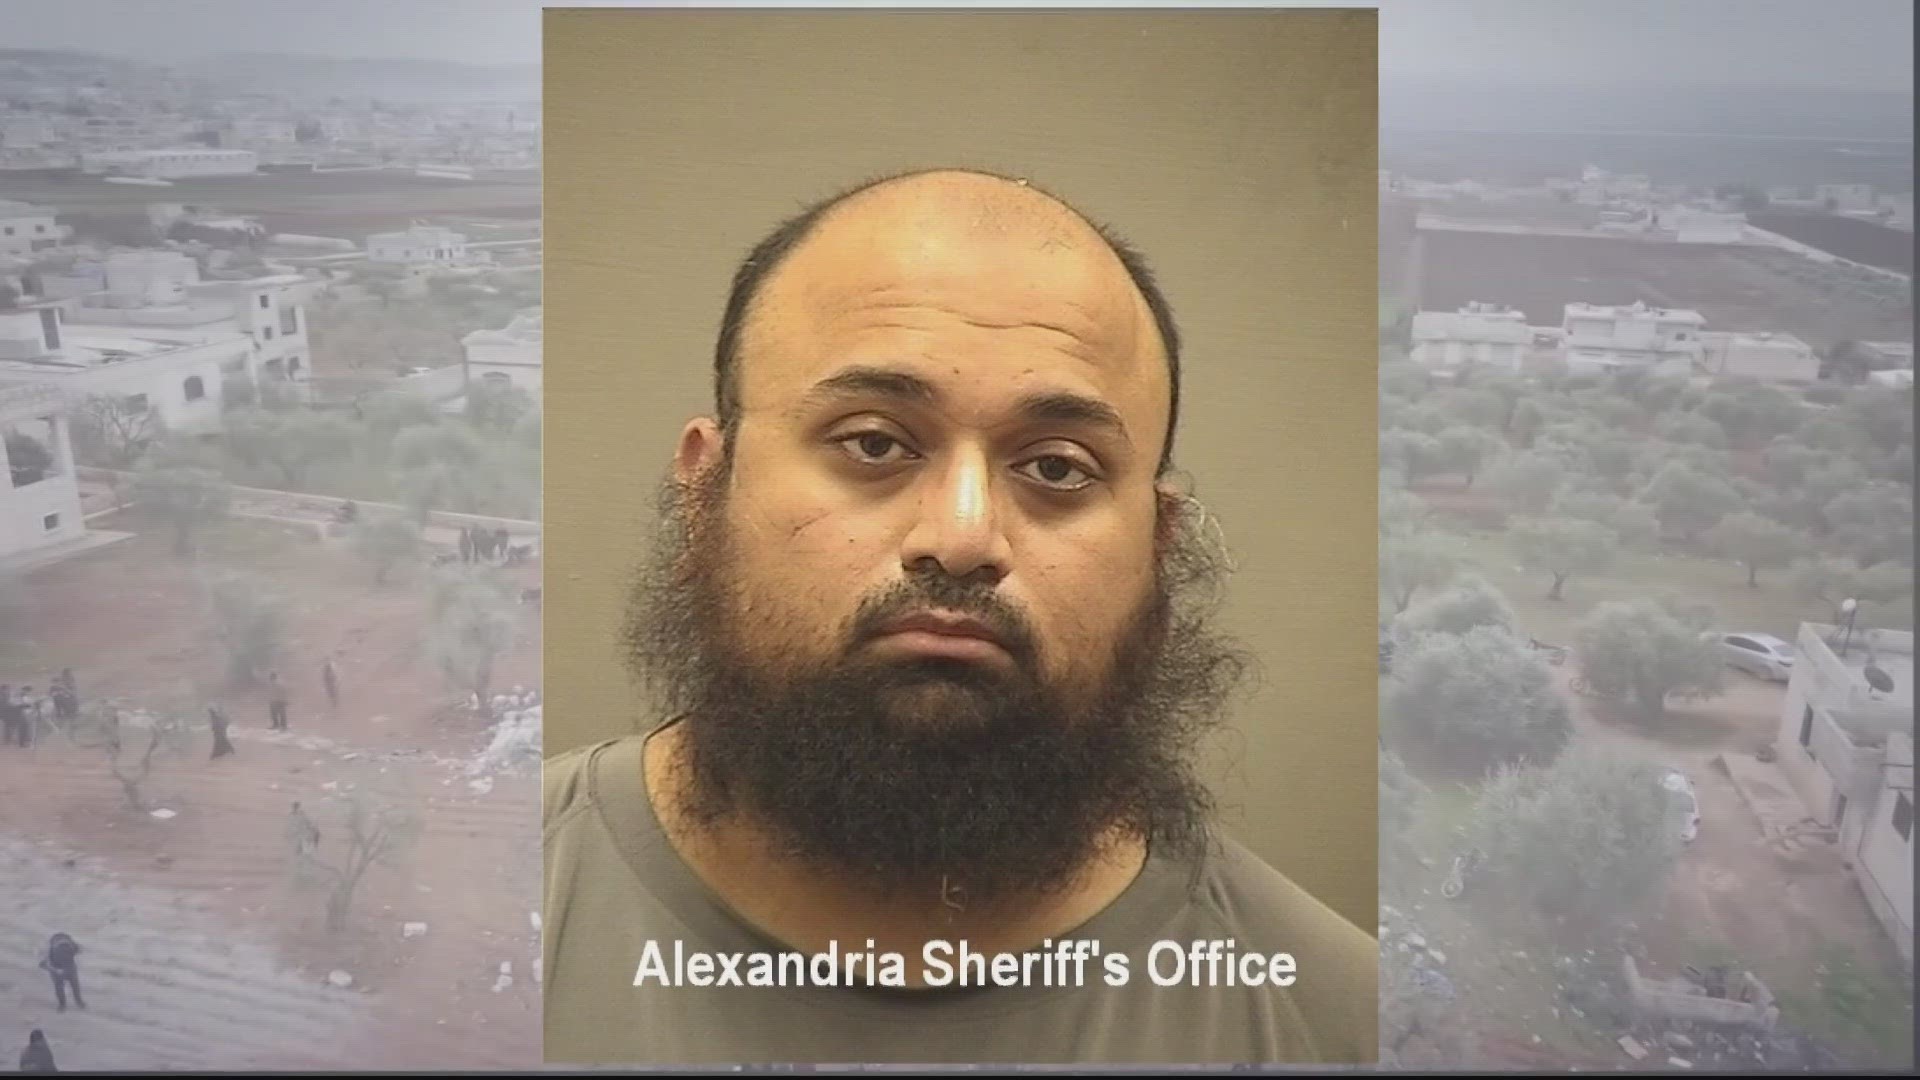 Prosecutors say Mohammed Chhipa has spent the last year trying to marry a woman convicted of a terrorism charge in Alexandria.